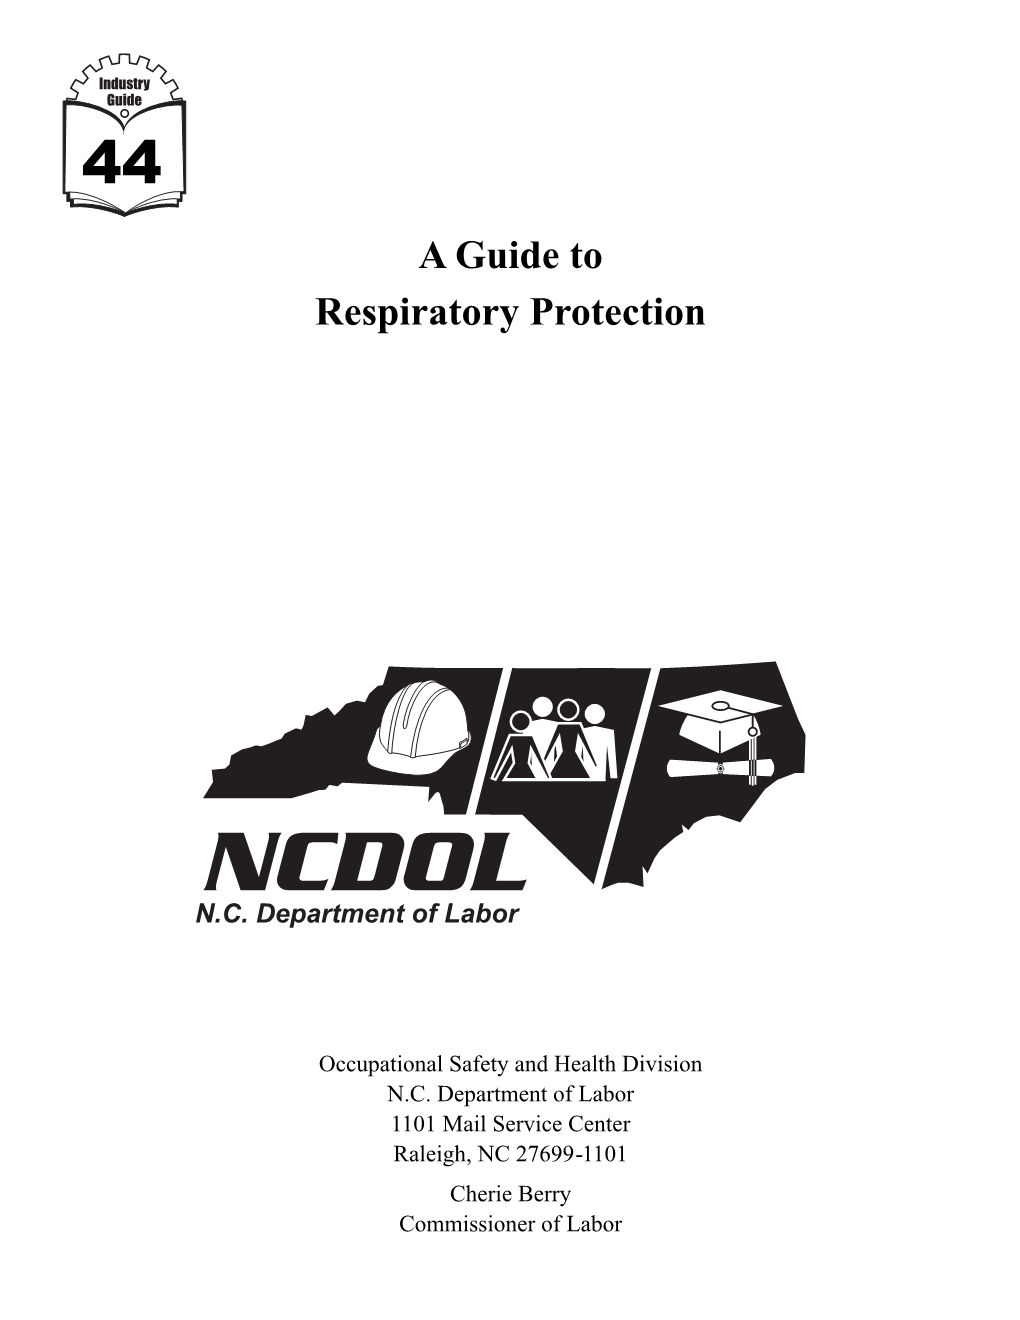 A Guide to Respiratory Protection